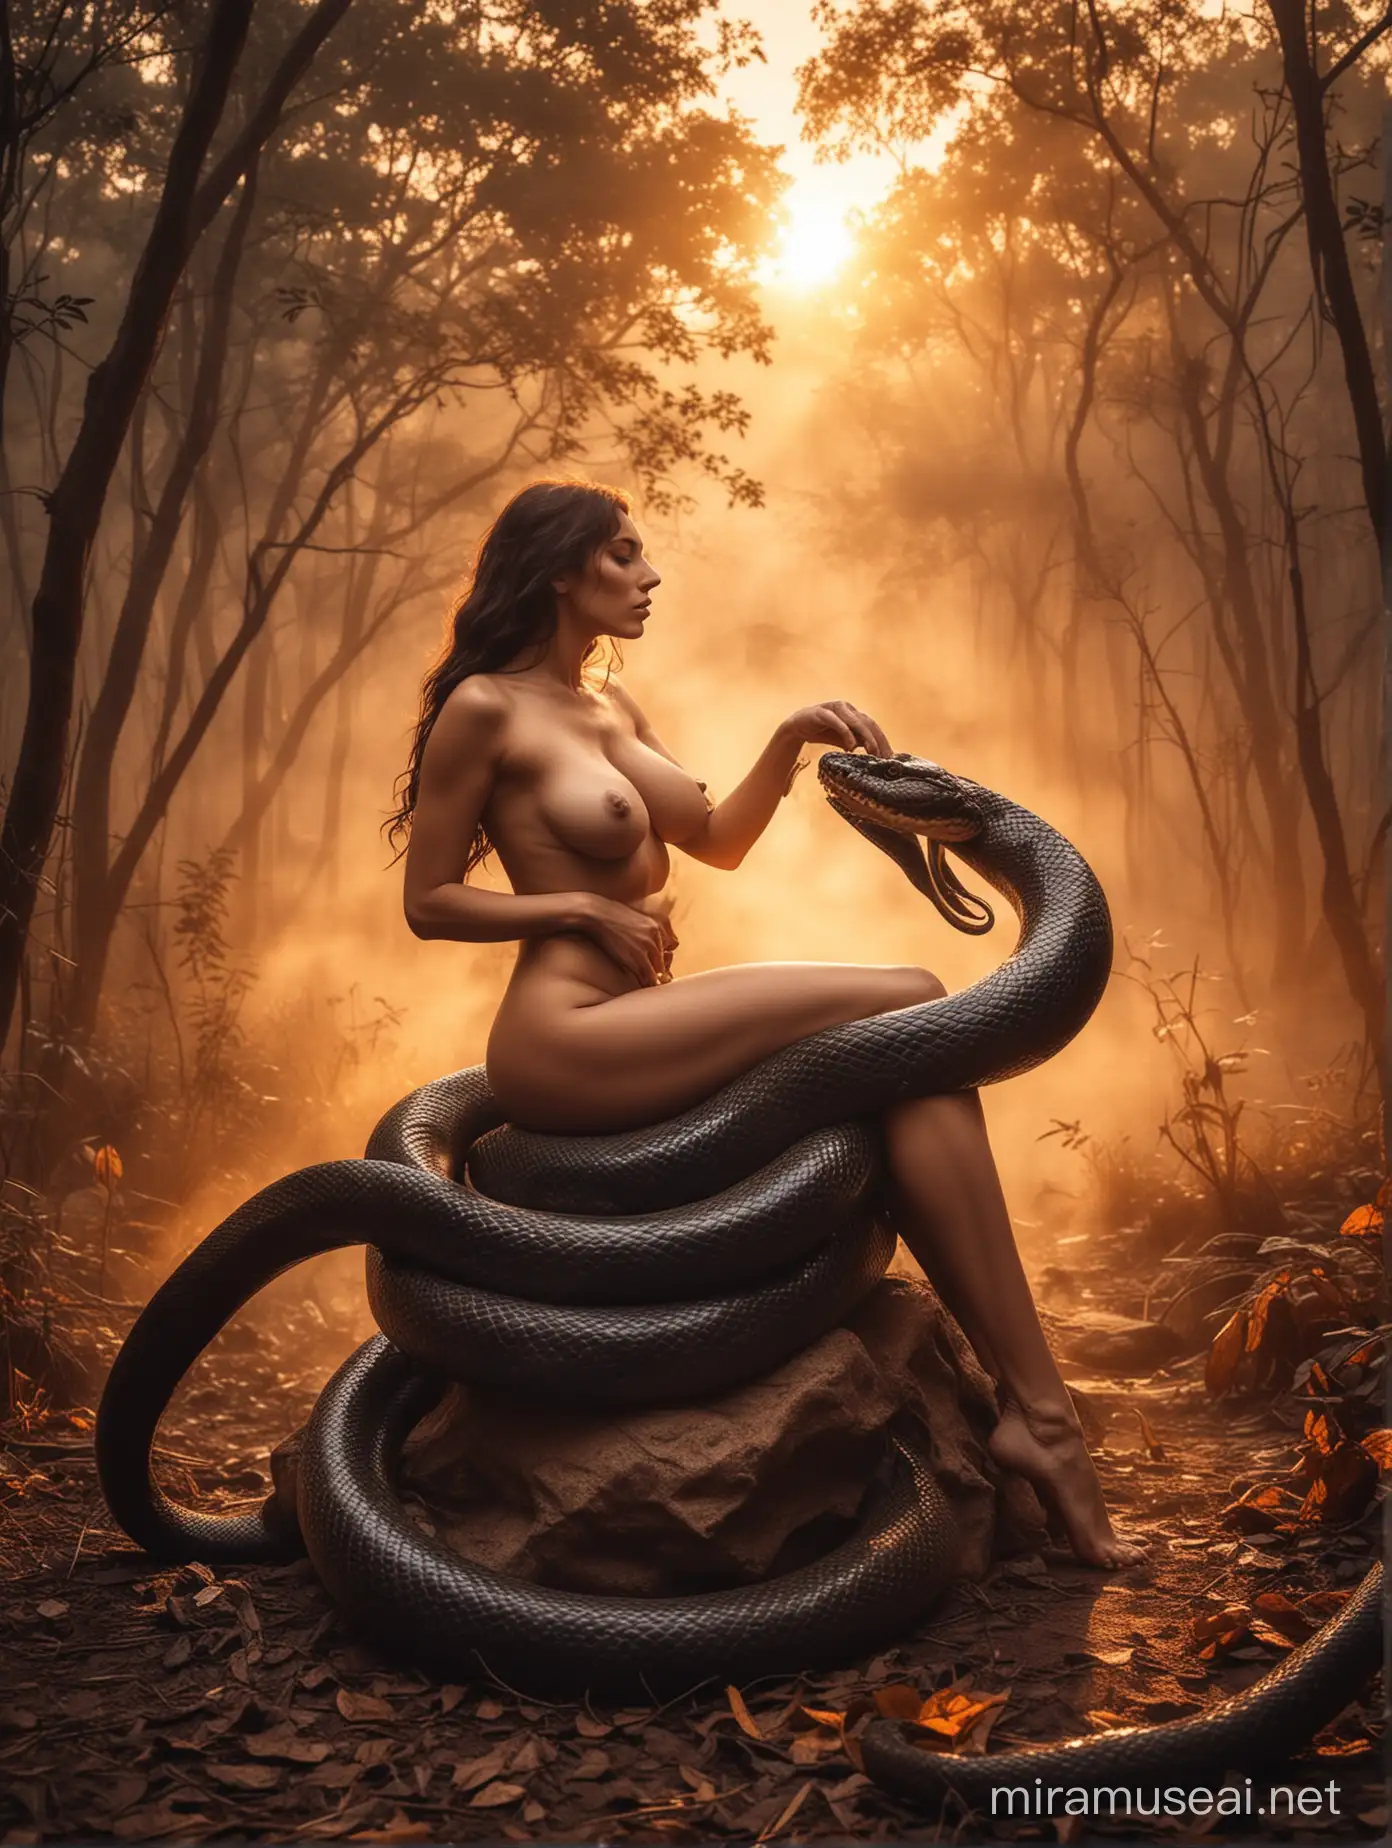 Black huge snake is wrapped around lying nude woman and eating her.  Deep forest in golden sunset atmosphere at backround with steam around woman.